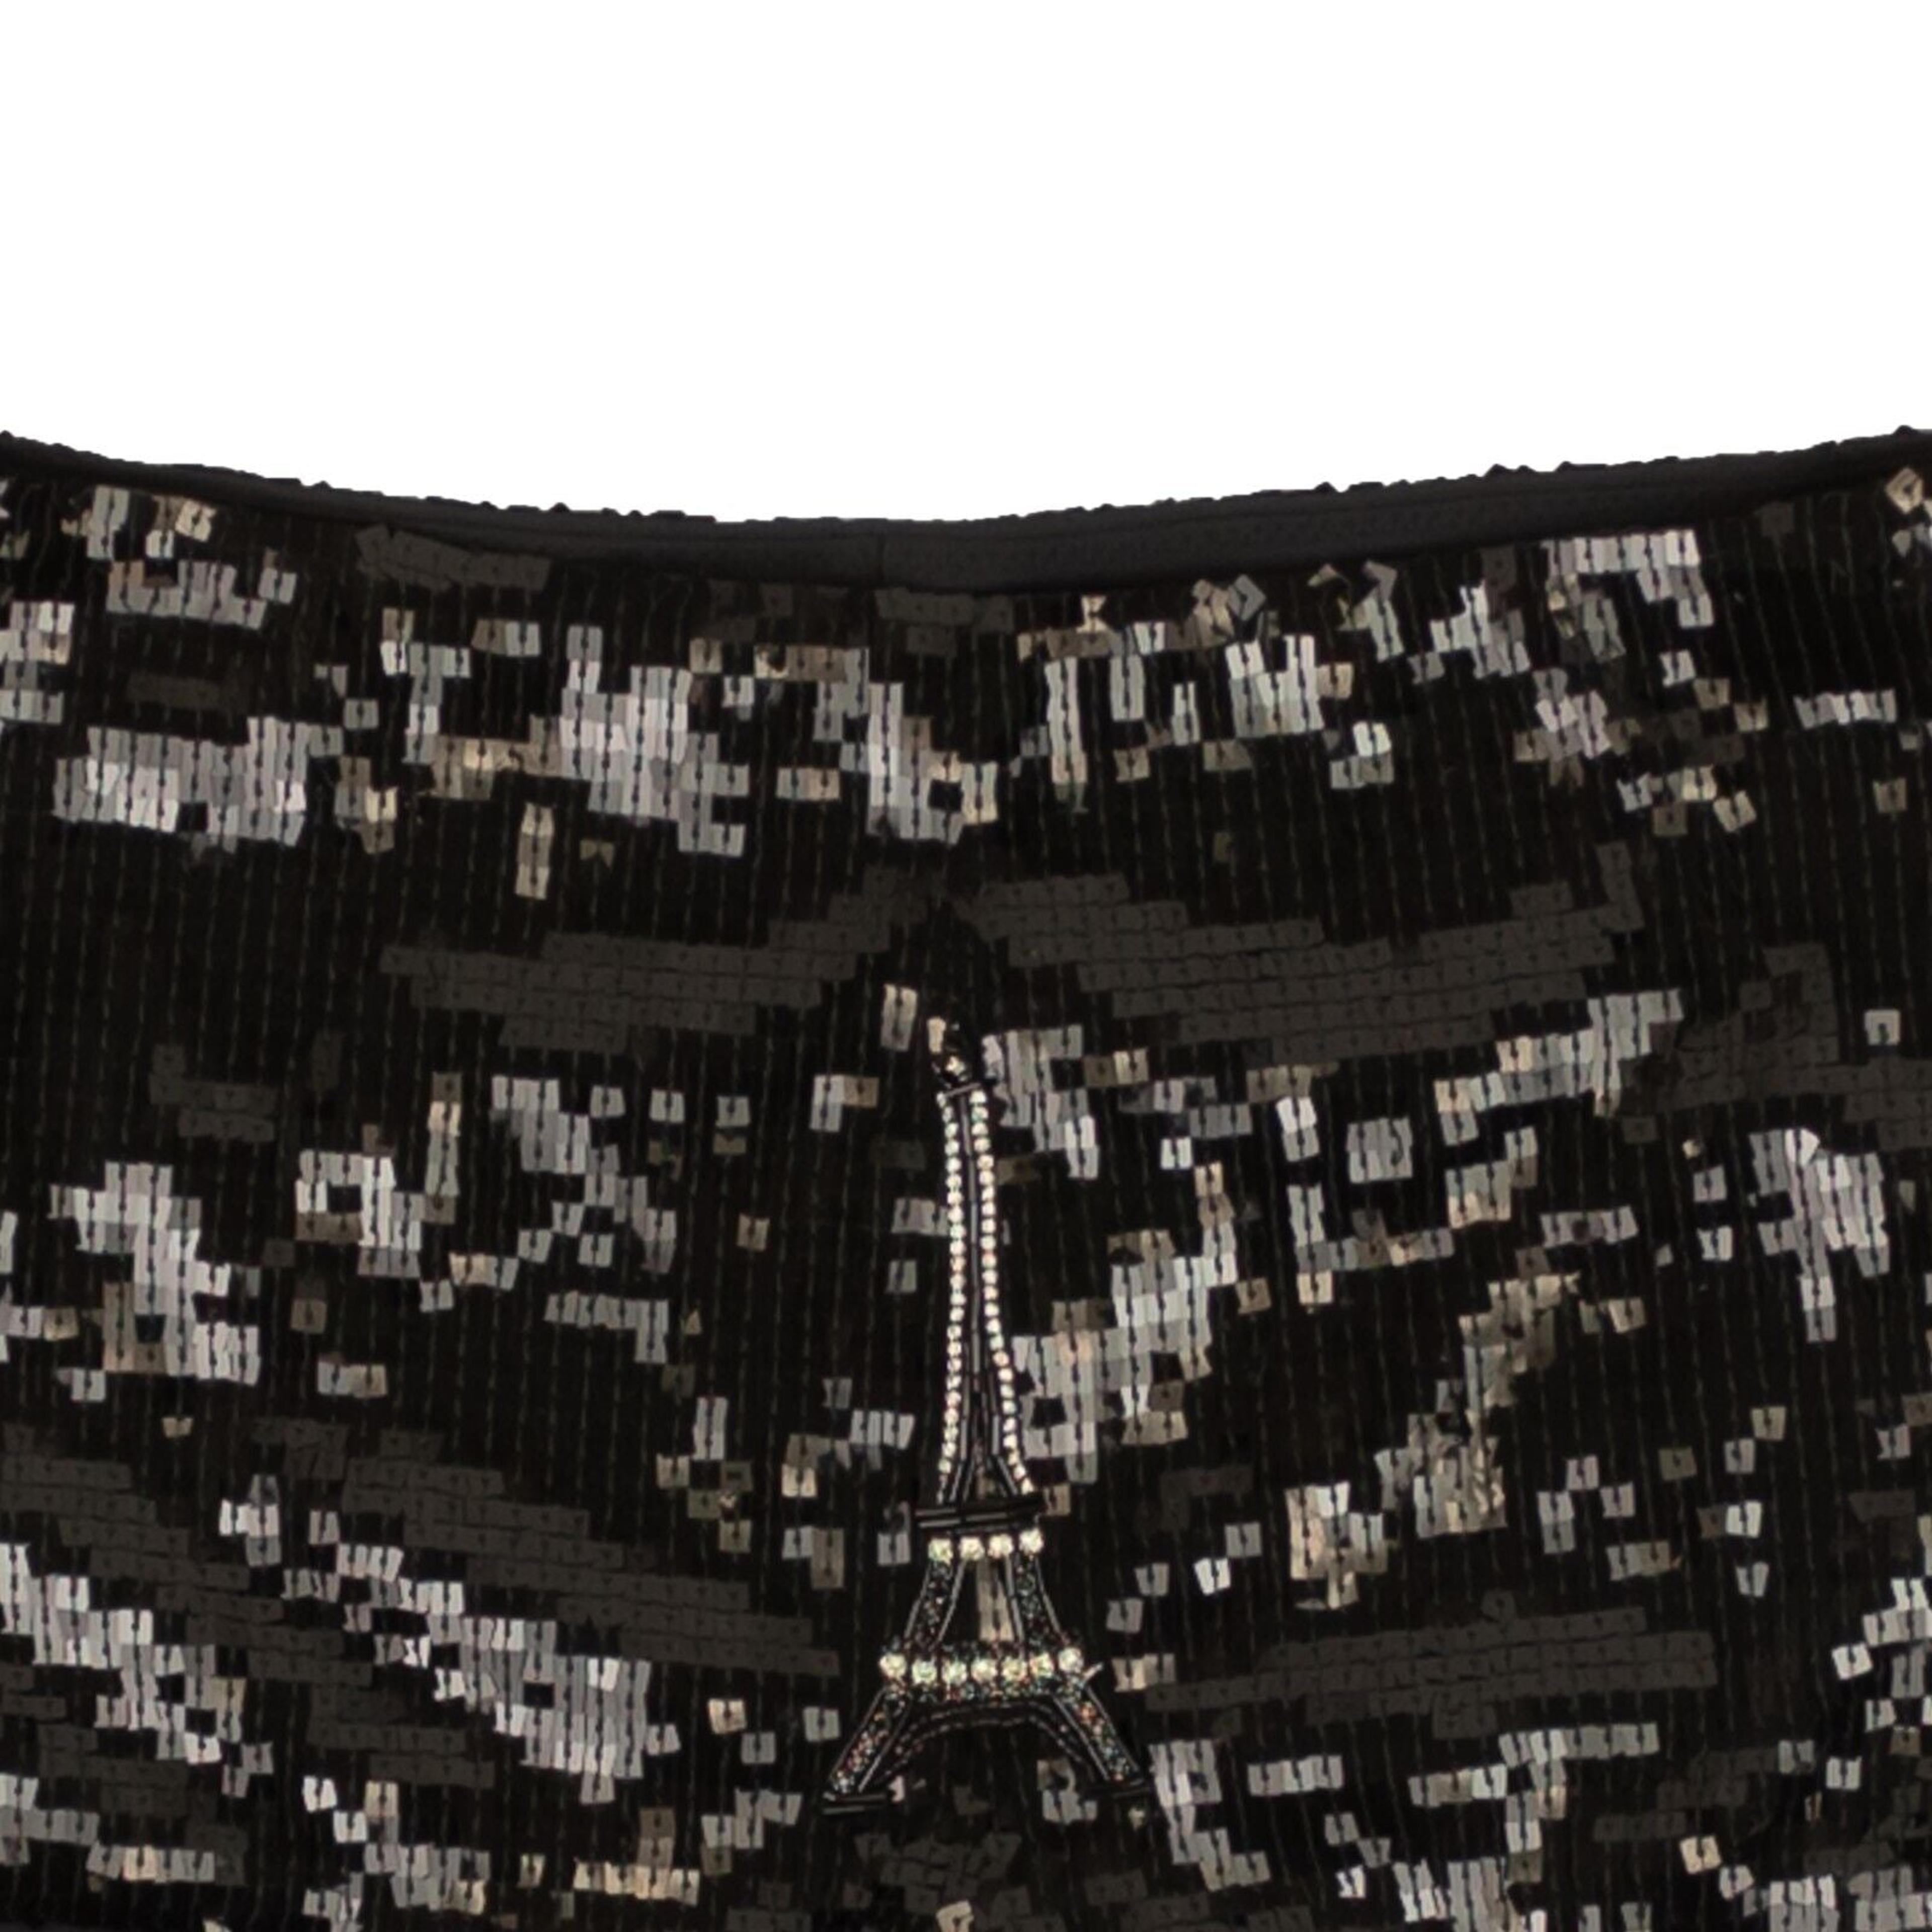 Alternate View 1 of Women's Black Sequin Embroidered Shorts